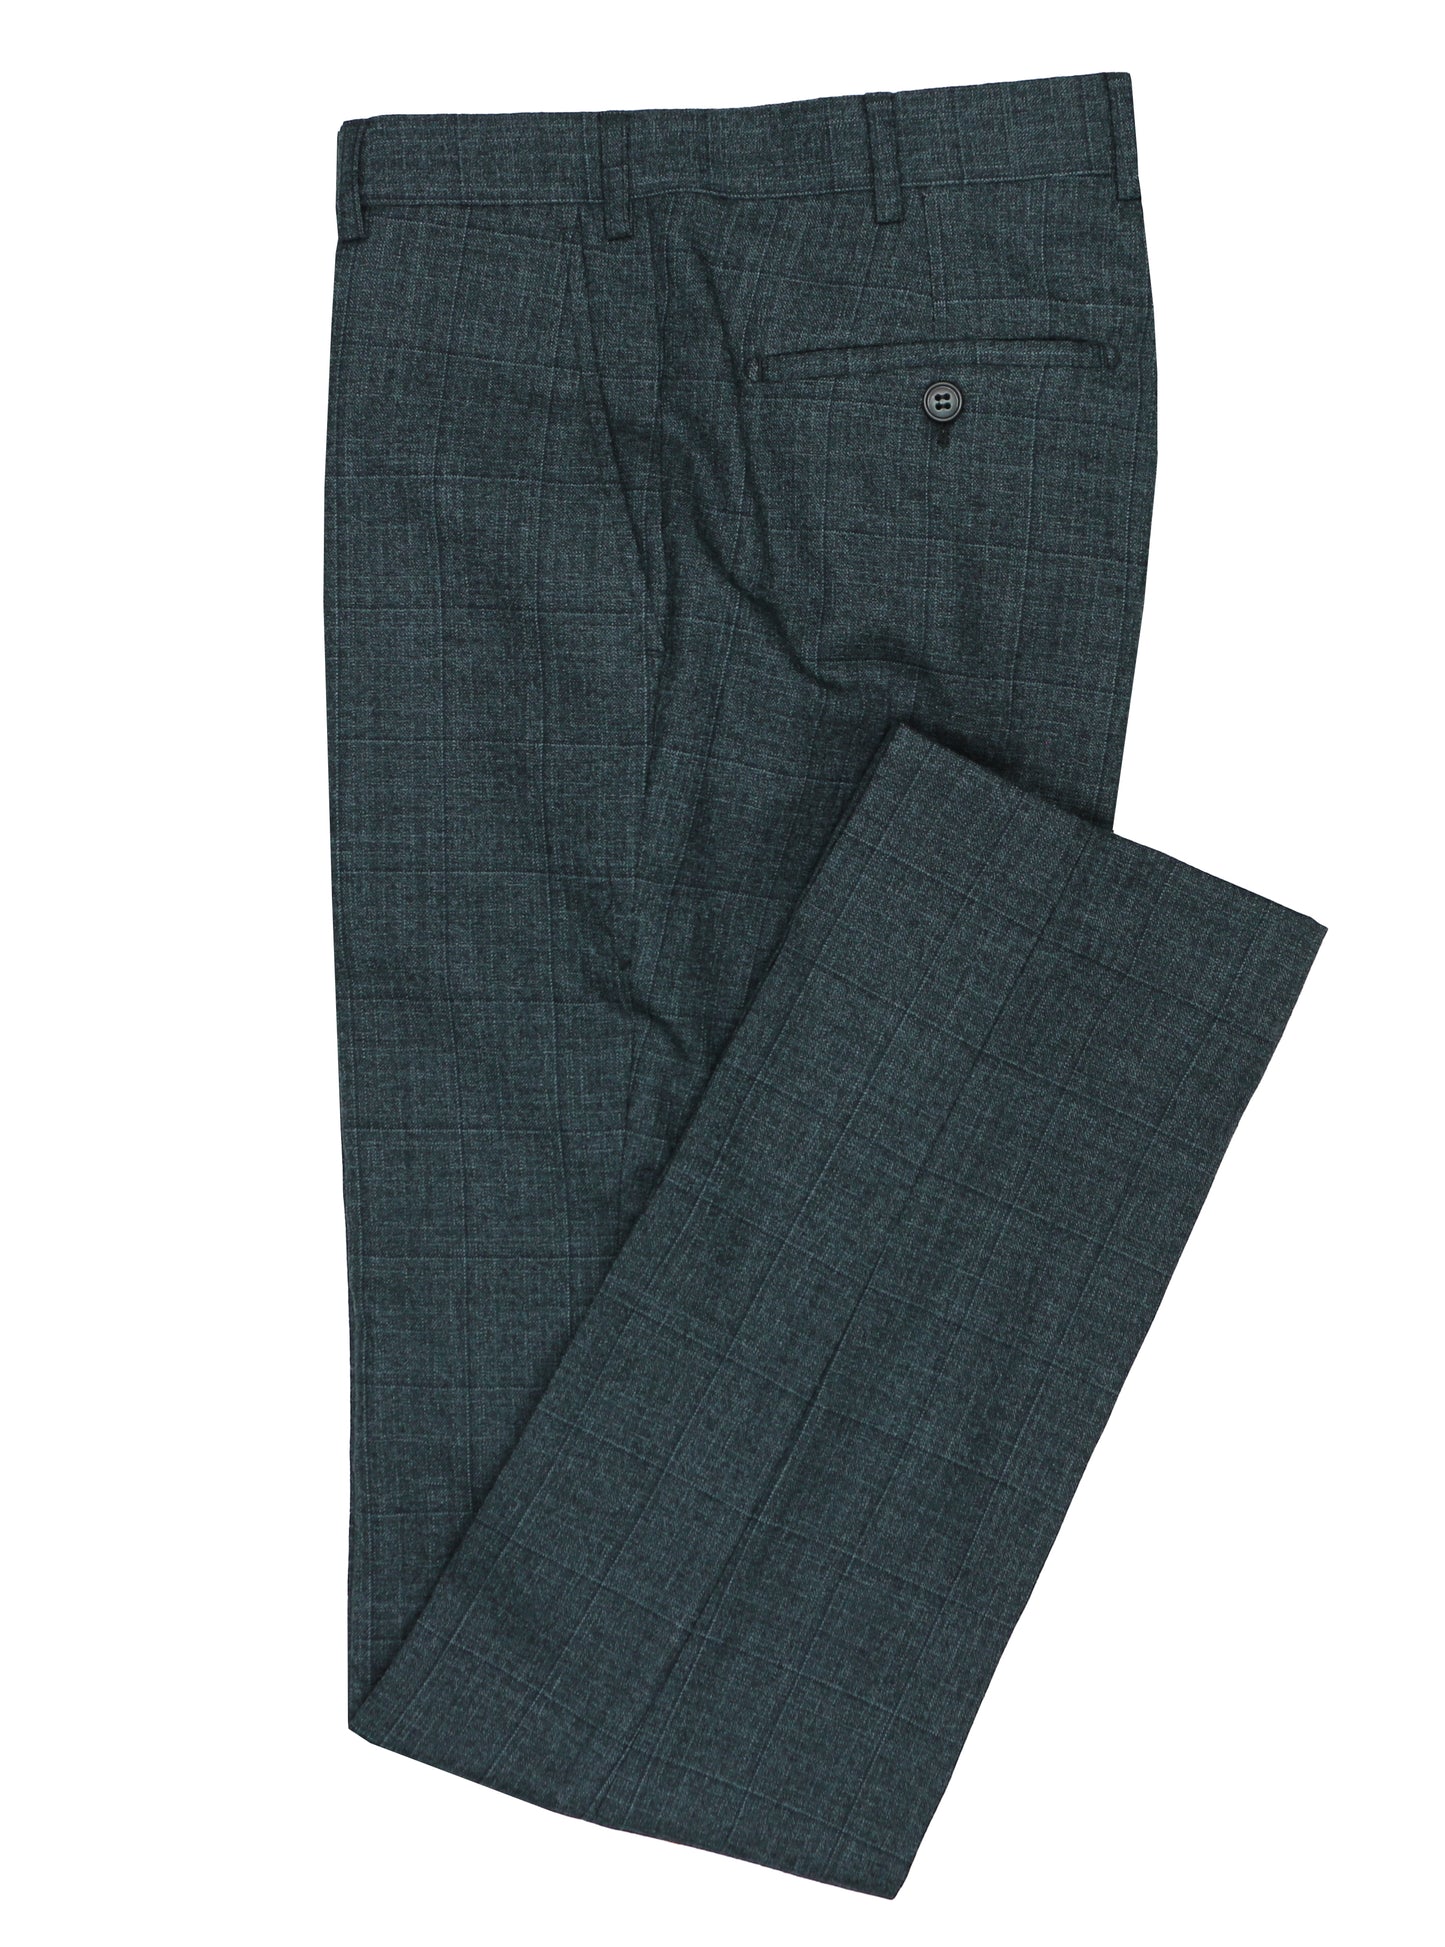 Lisbon Edward Green Checked Suit